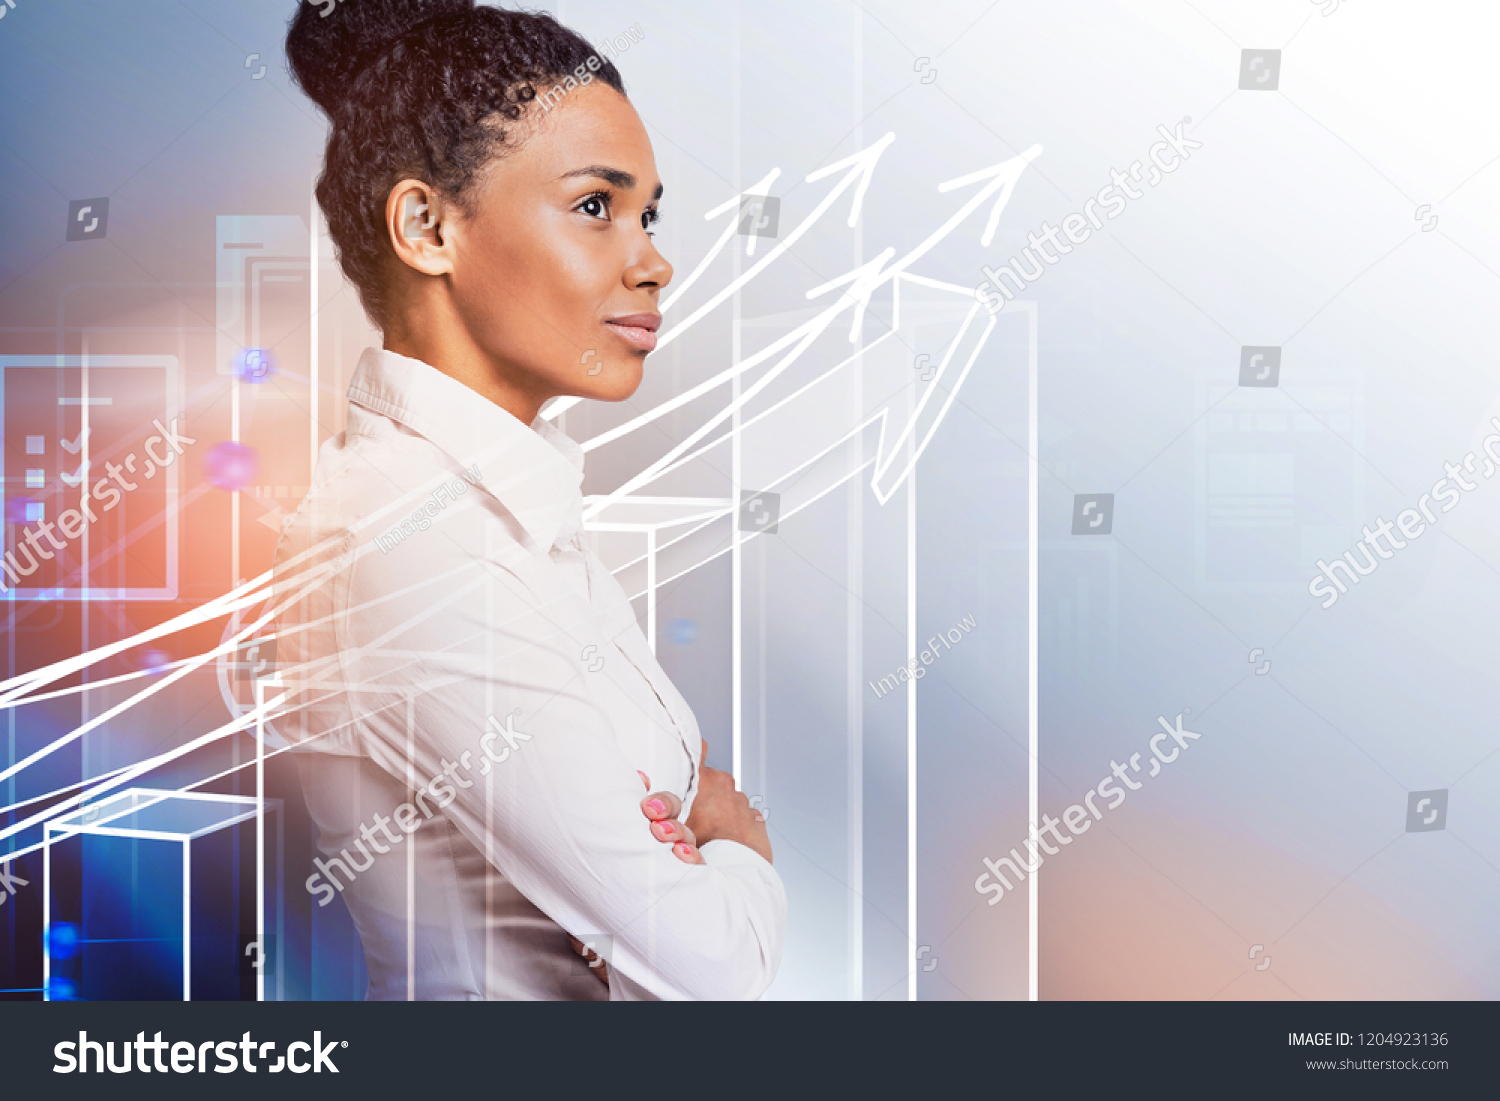 Side view of confident young african american businesswoman standing with crossed arms and looking forward. Immersive interface with growing bar chart. Toned image double exposure mock up #1204923136